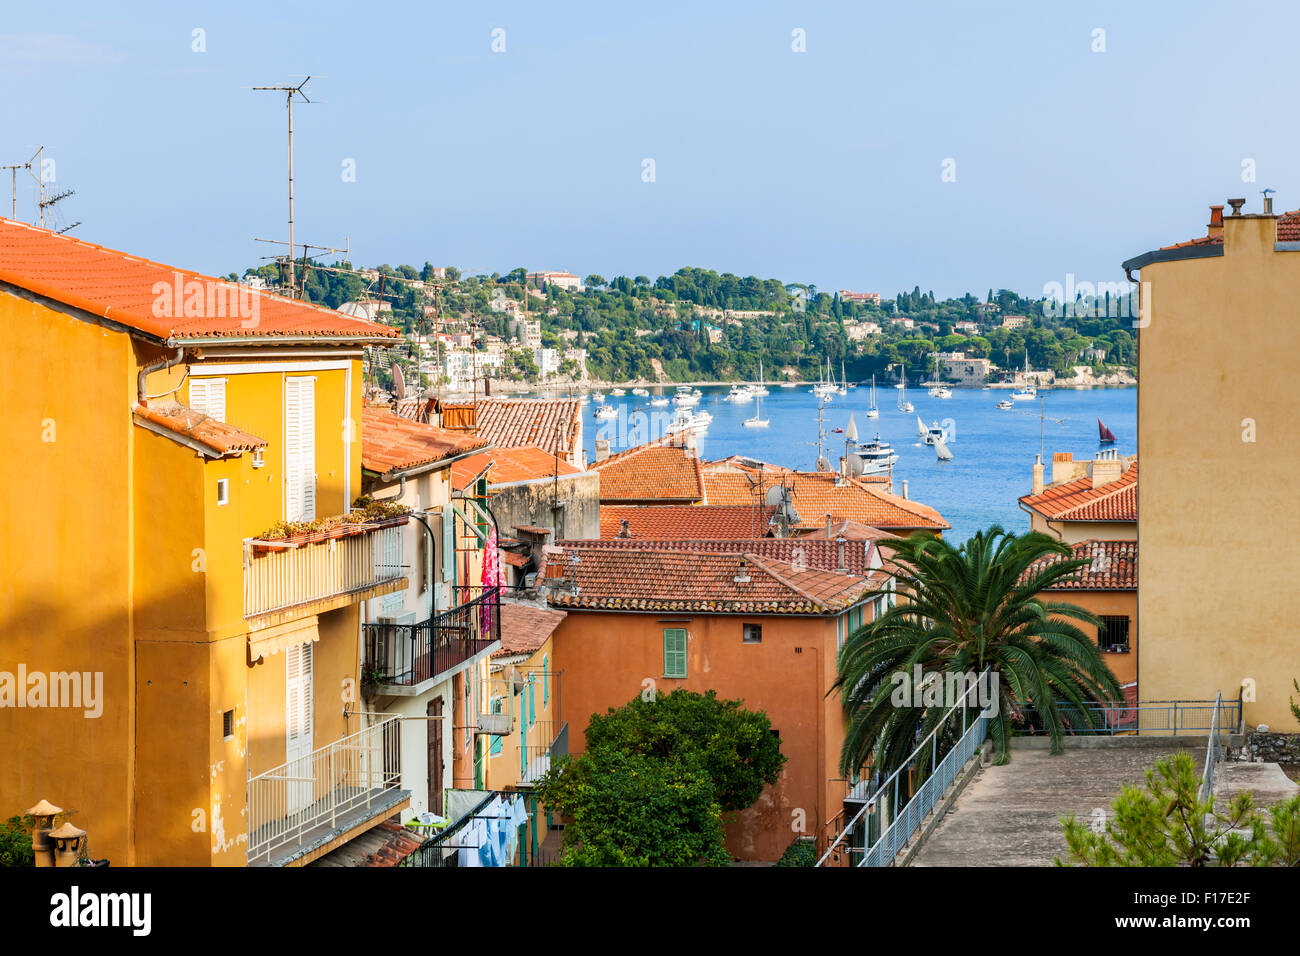 View of colorful rooftops and Mediterranean sea harbor with boats in old medieval town Villefranche-sur-Mer on French Riviera, F Stock Photo